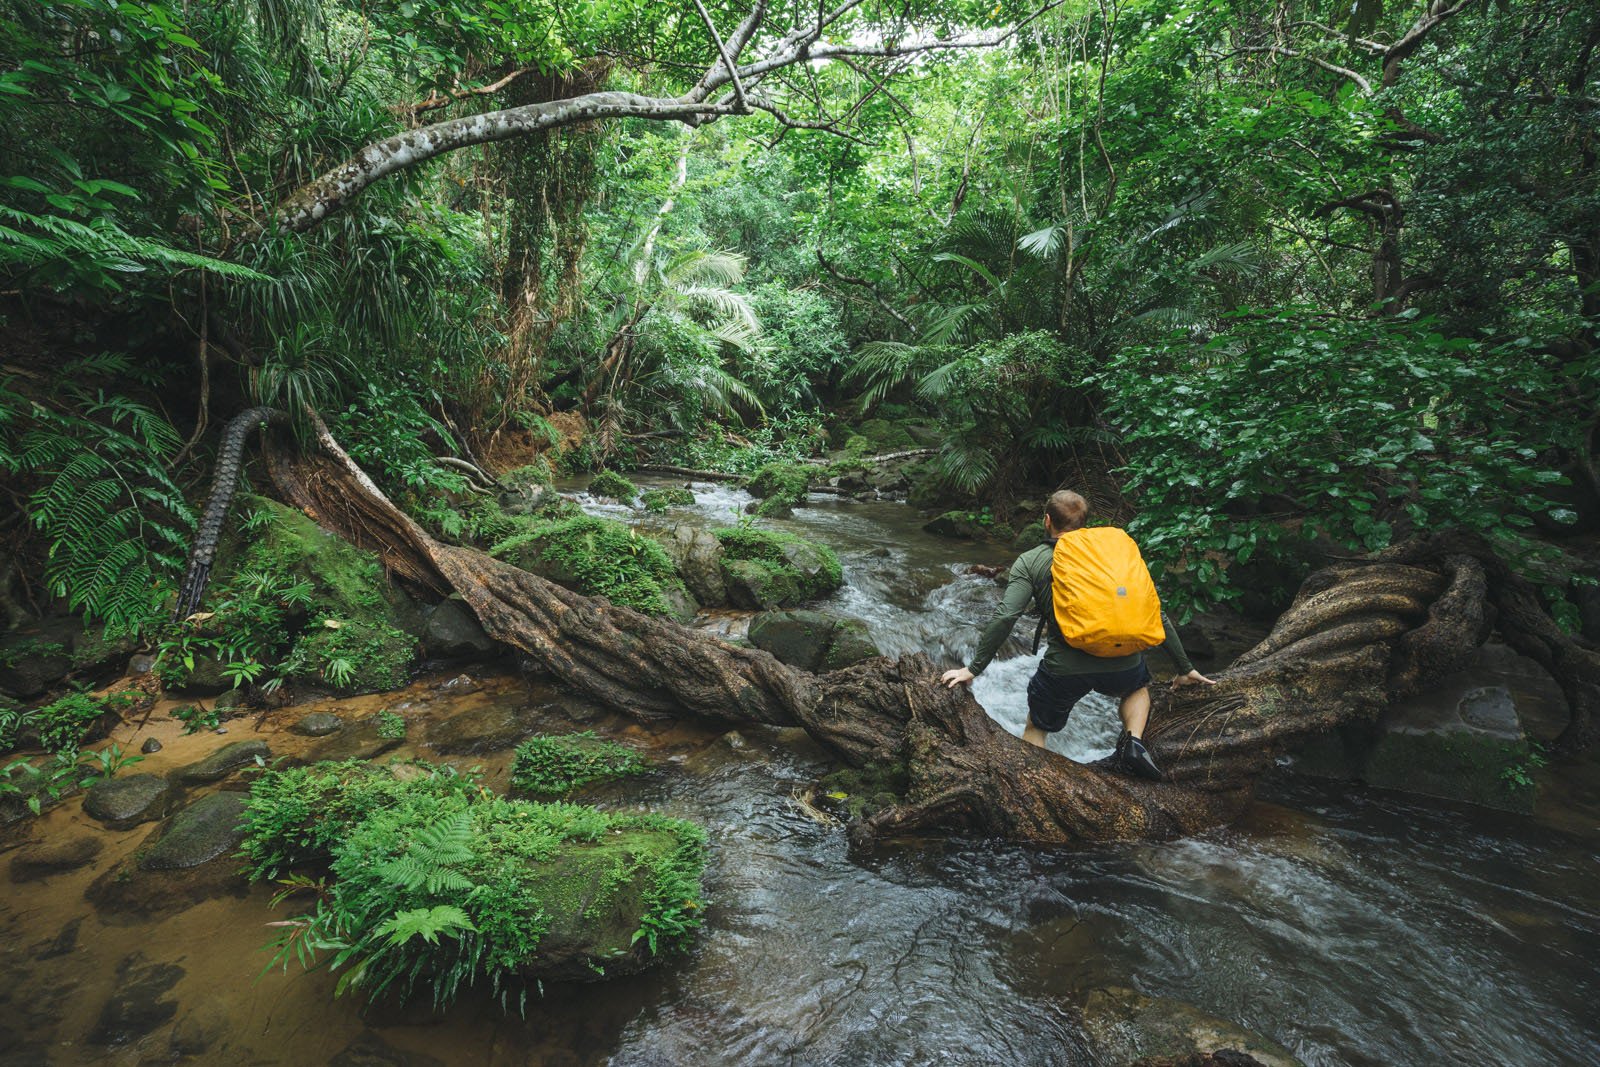 This is why I had purchased the Pelican all-weather case prior to the trip. Jungle stream trekking.